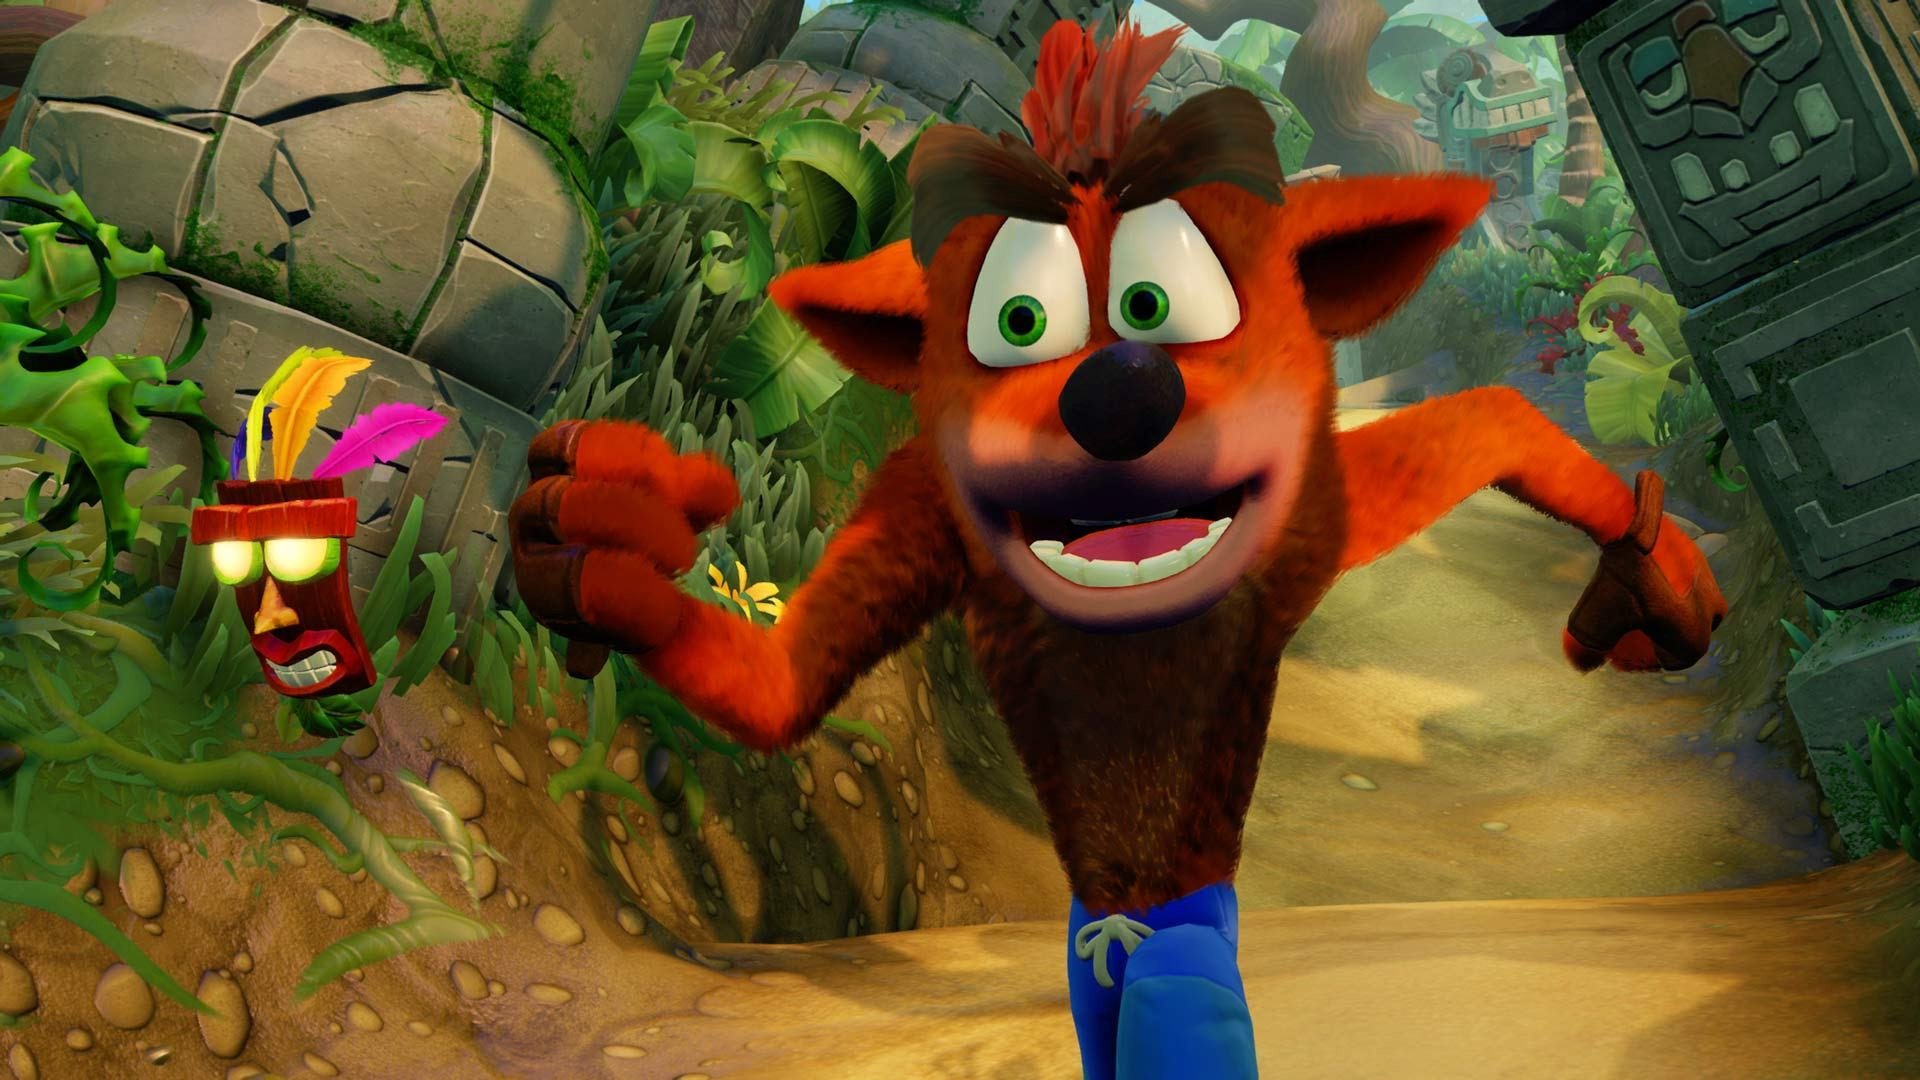 There’s a Crash Bandicoot mobile game coming and it’s an endless runner